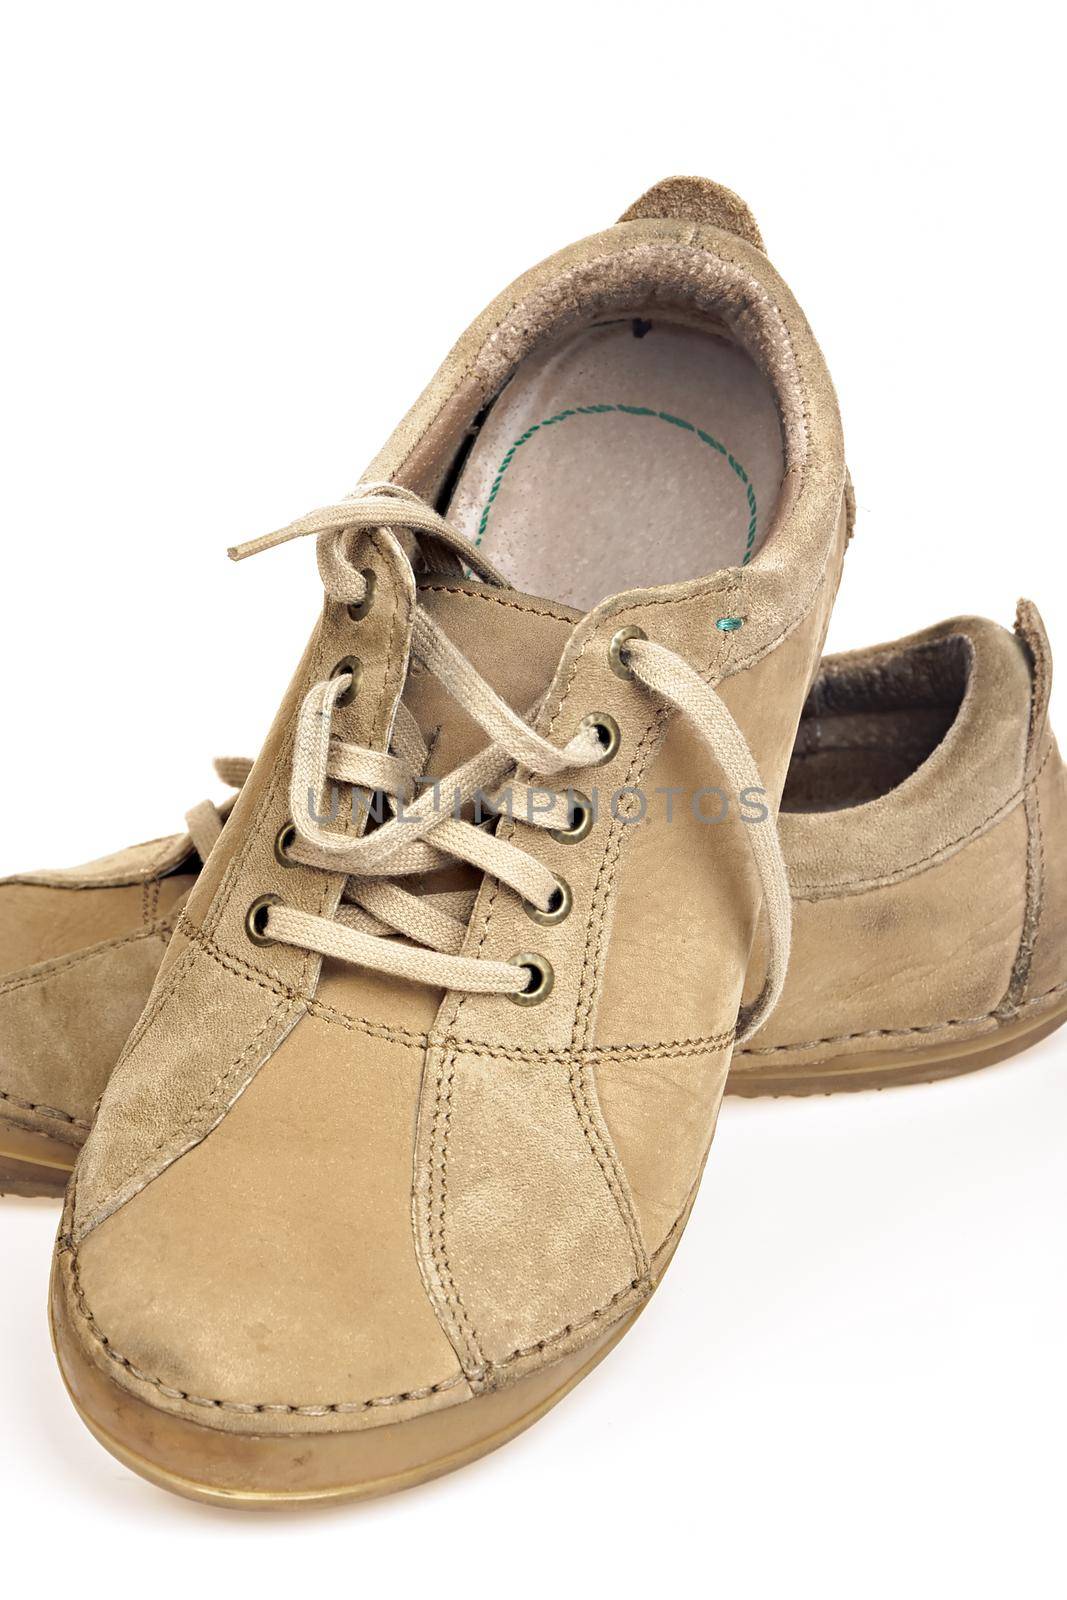 Casual brown shoes on white background. Urban fashion.